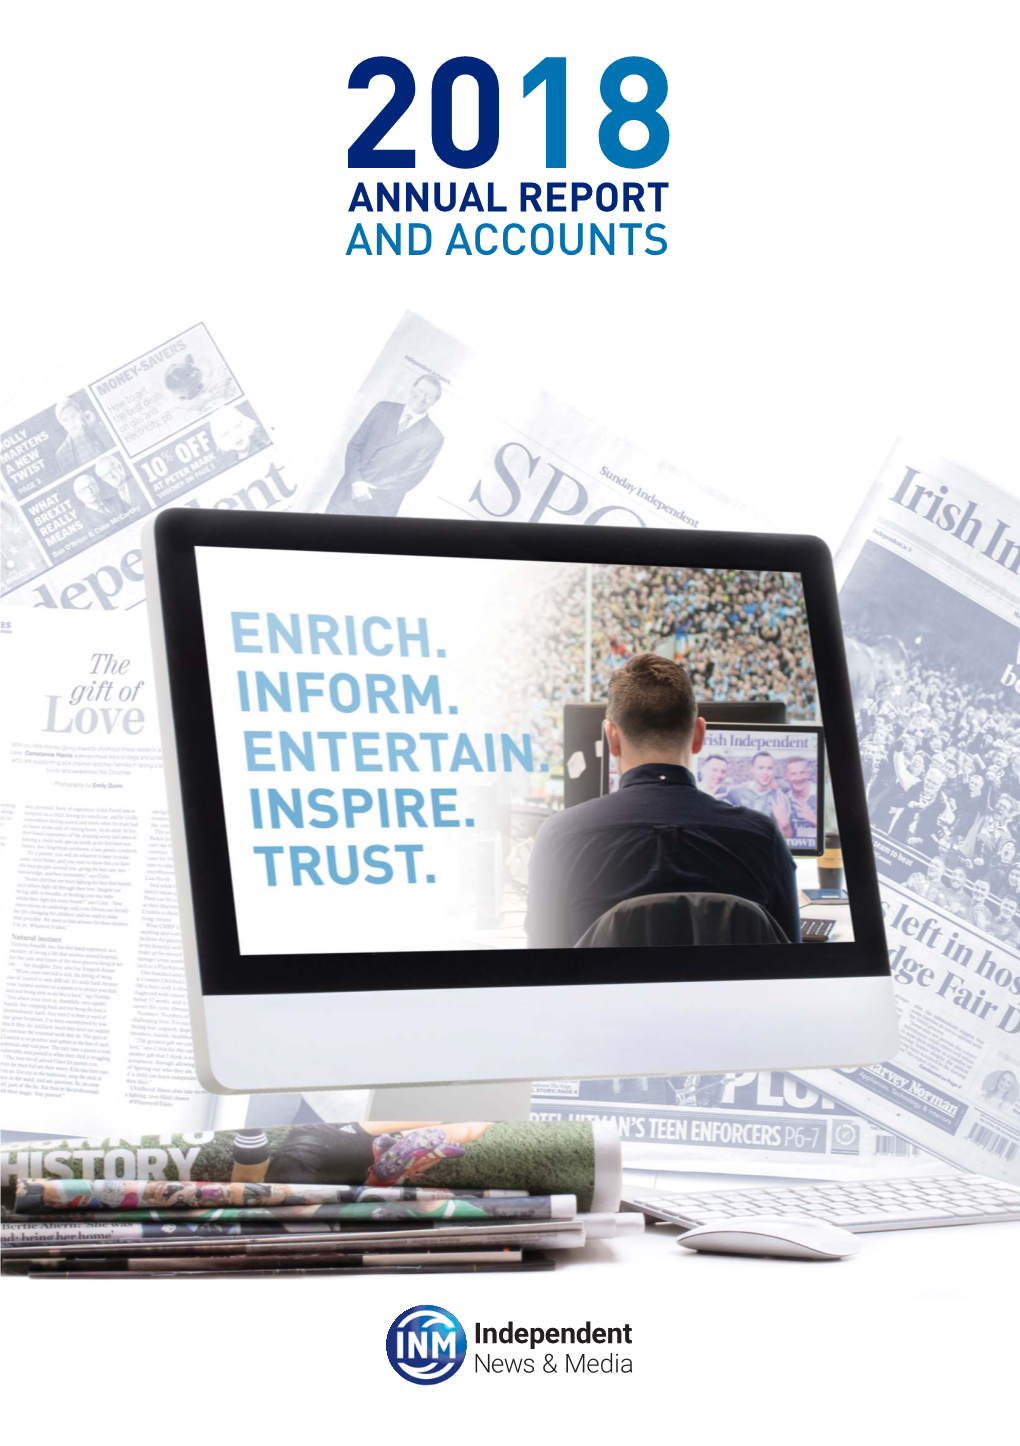 Annual Report and Accounts Independent News & Media Plc Annual Report & Accounts 2018